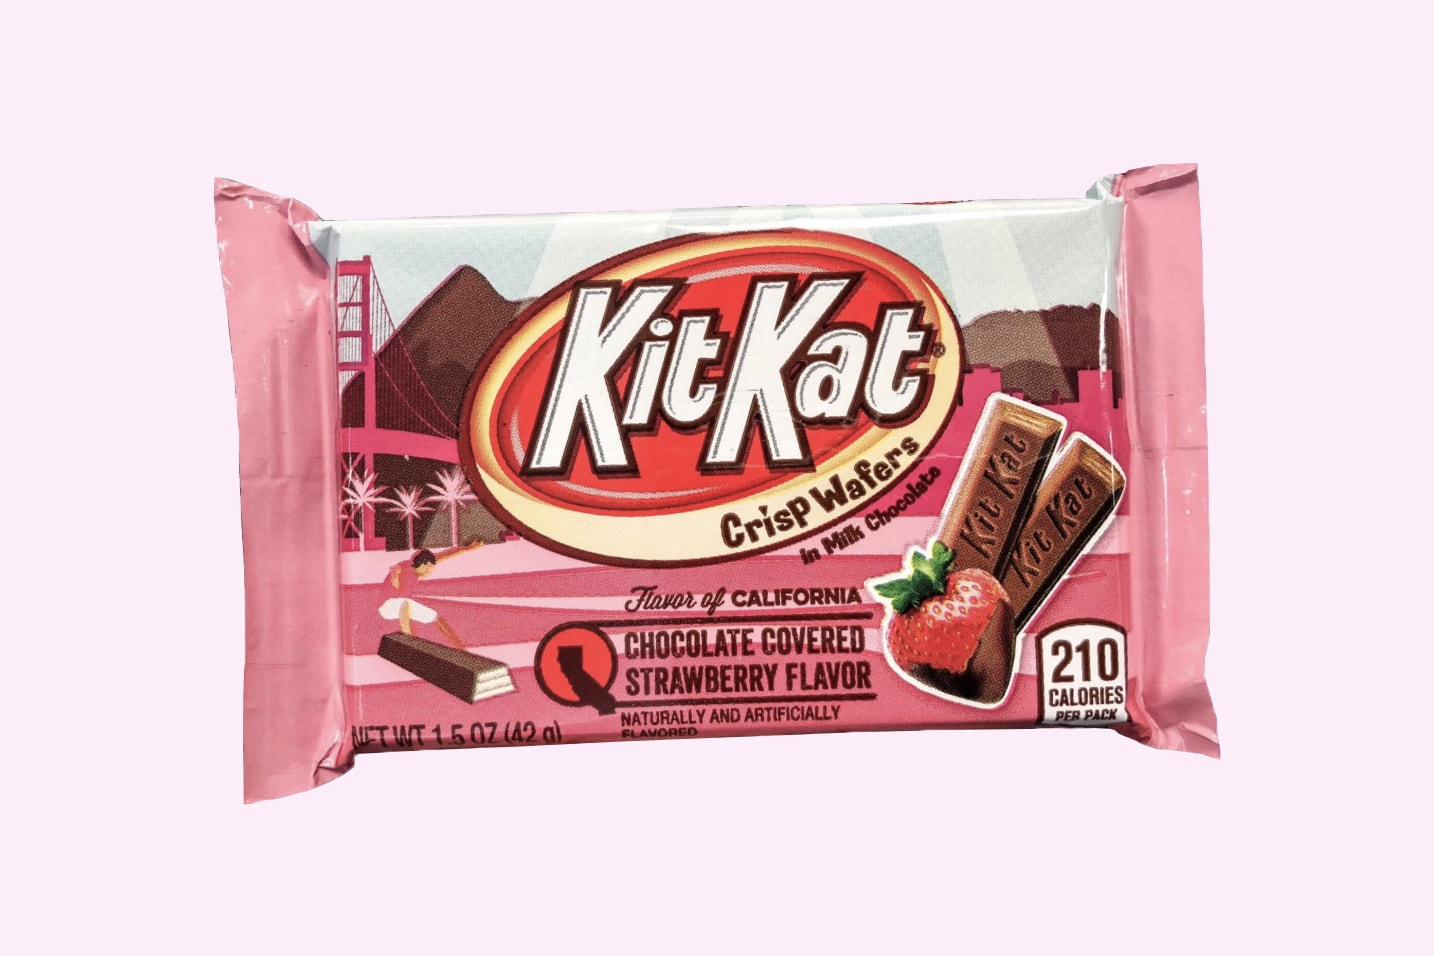 Where to Buy Chocolate Covered Strawberry Kit Kat